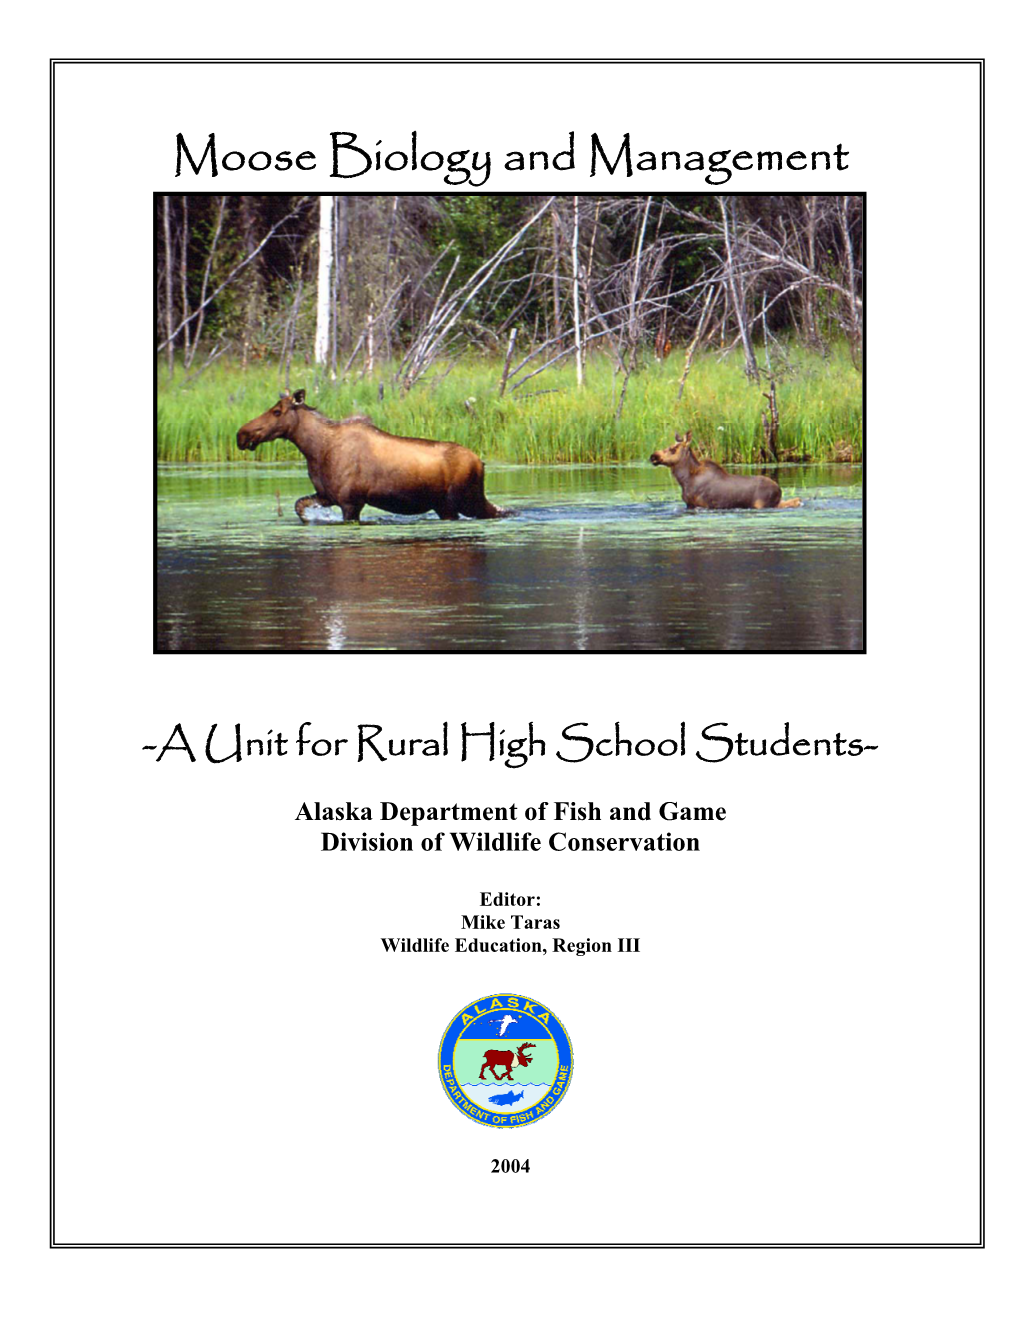 Moose Biology and Management; a Unit for Rural High School Students